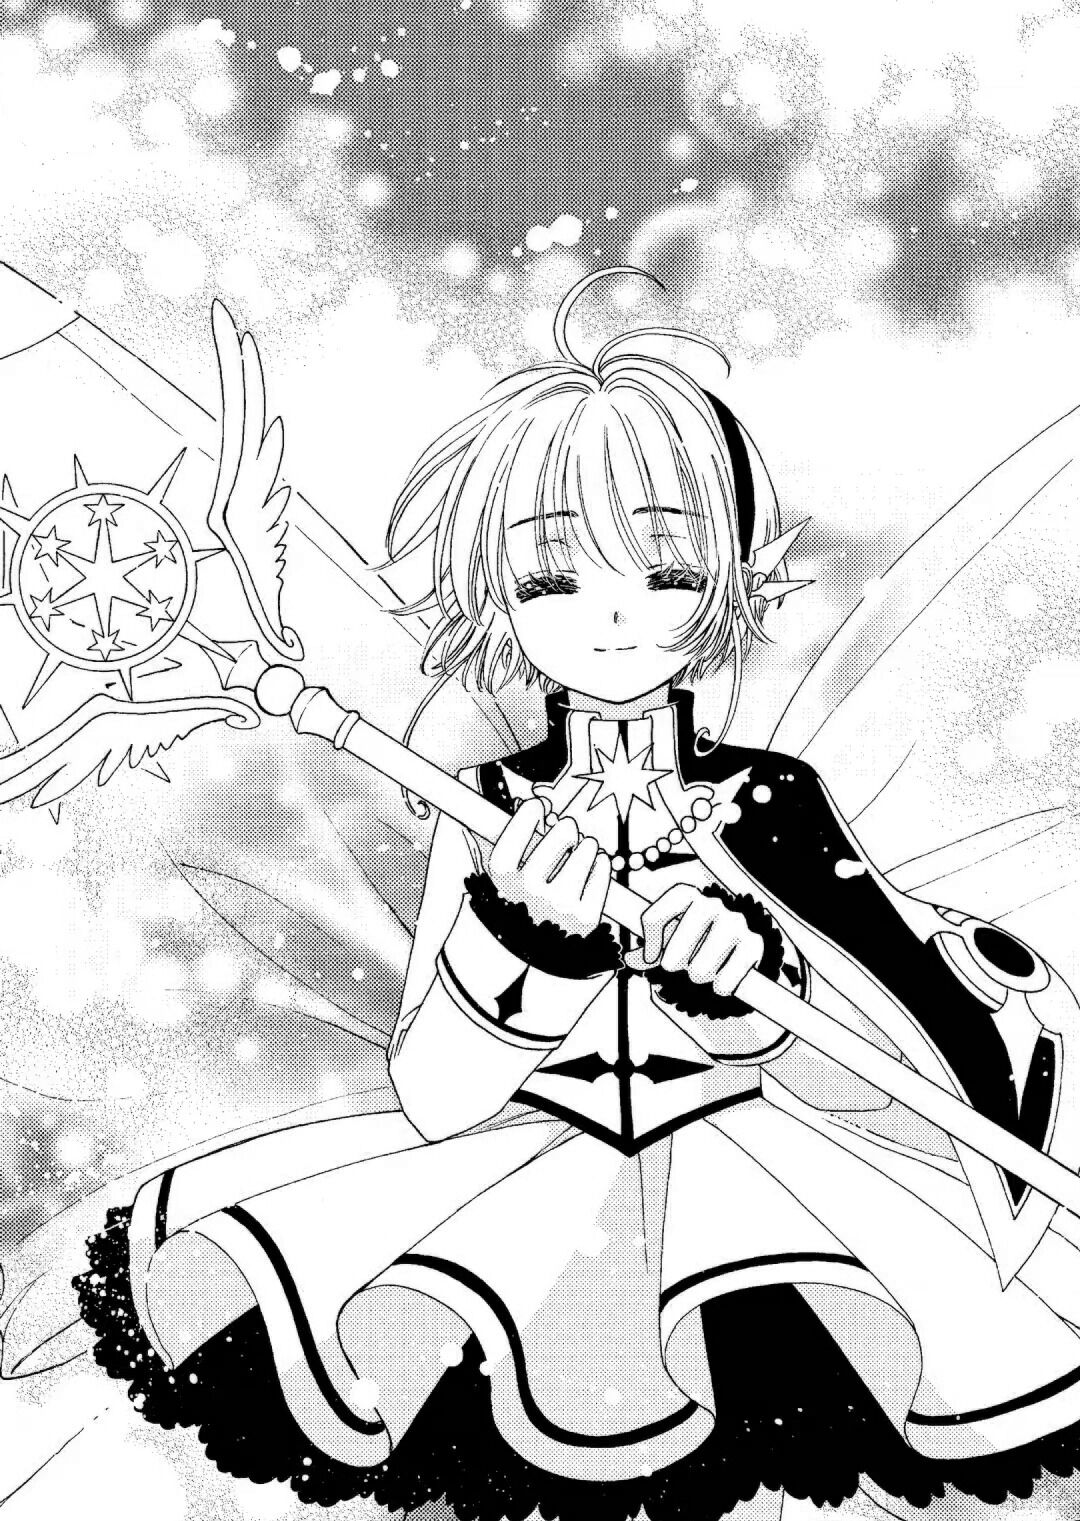 Art] Cardcaptor Sakura Clear Card chapter 79 by Clamp. Chapter 80 will be  the final chapter of the clear card manga series. : r/manga